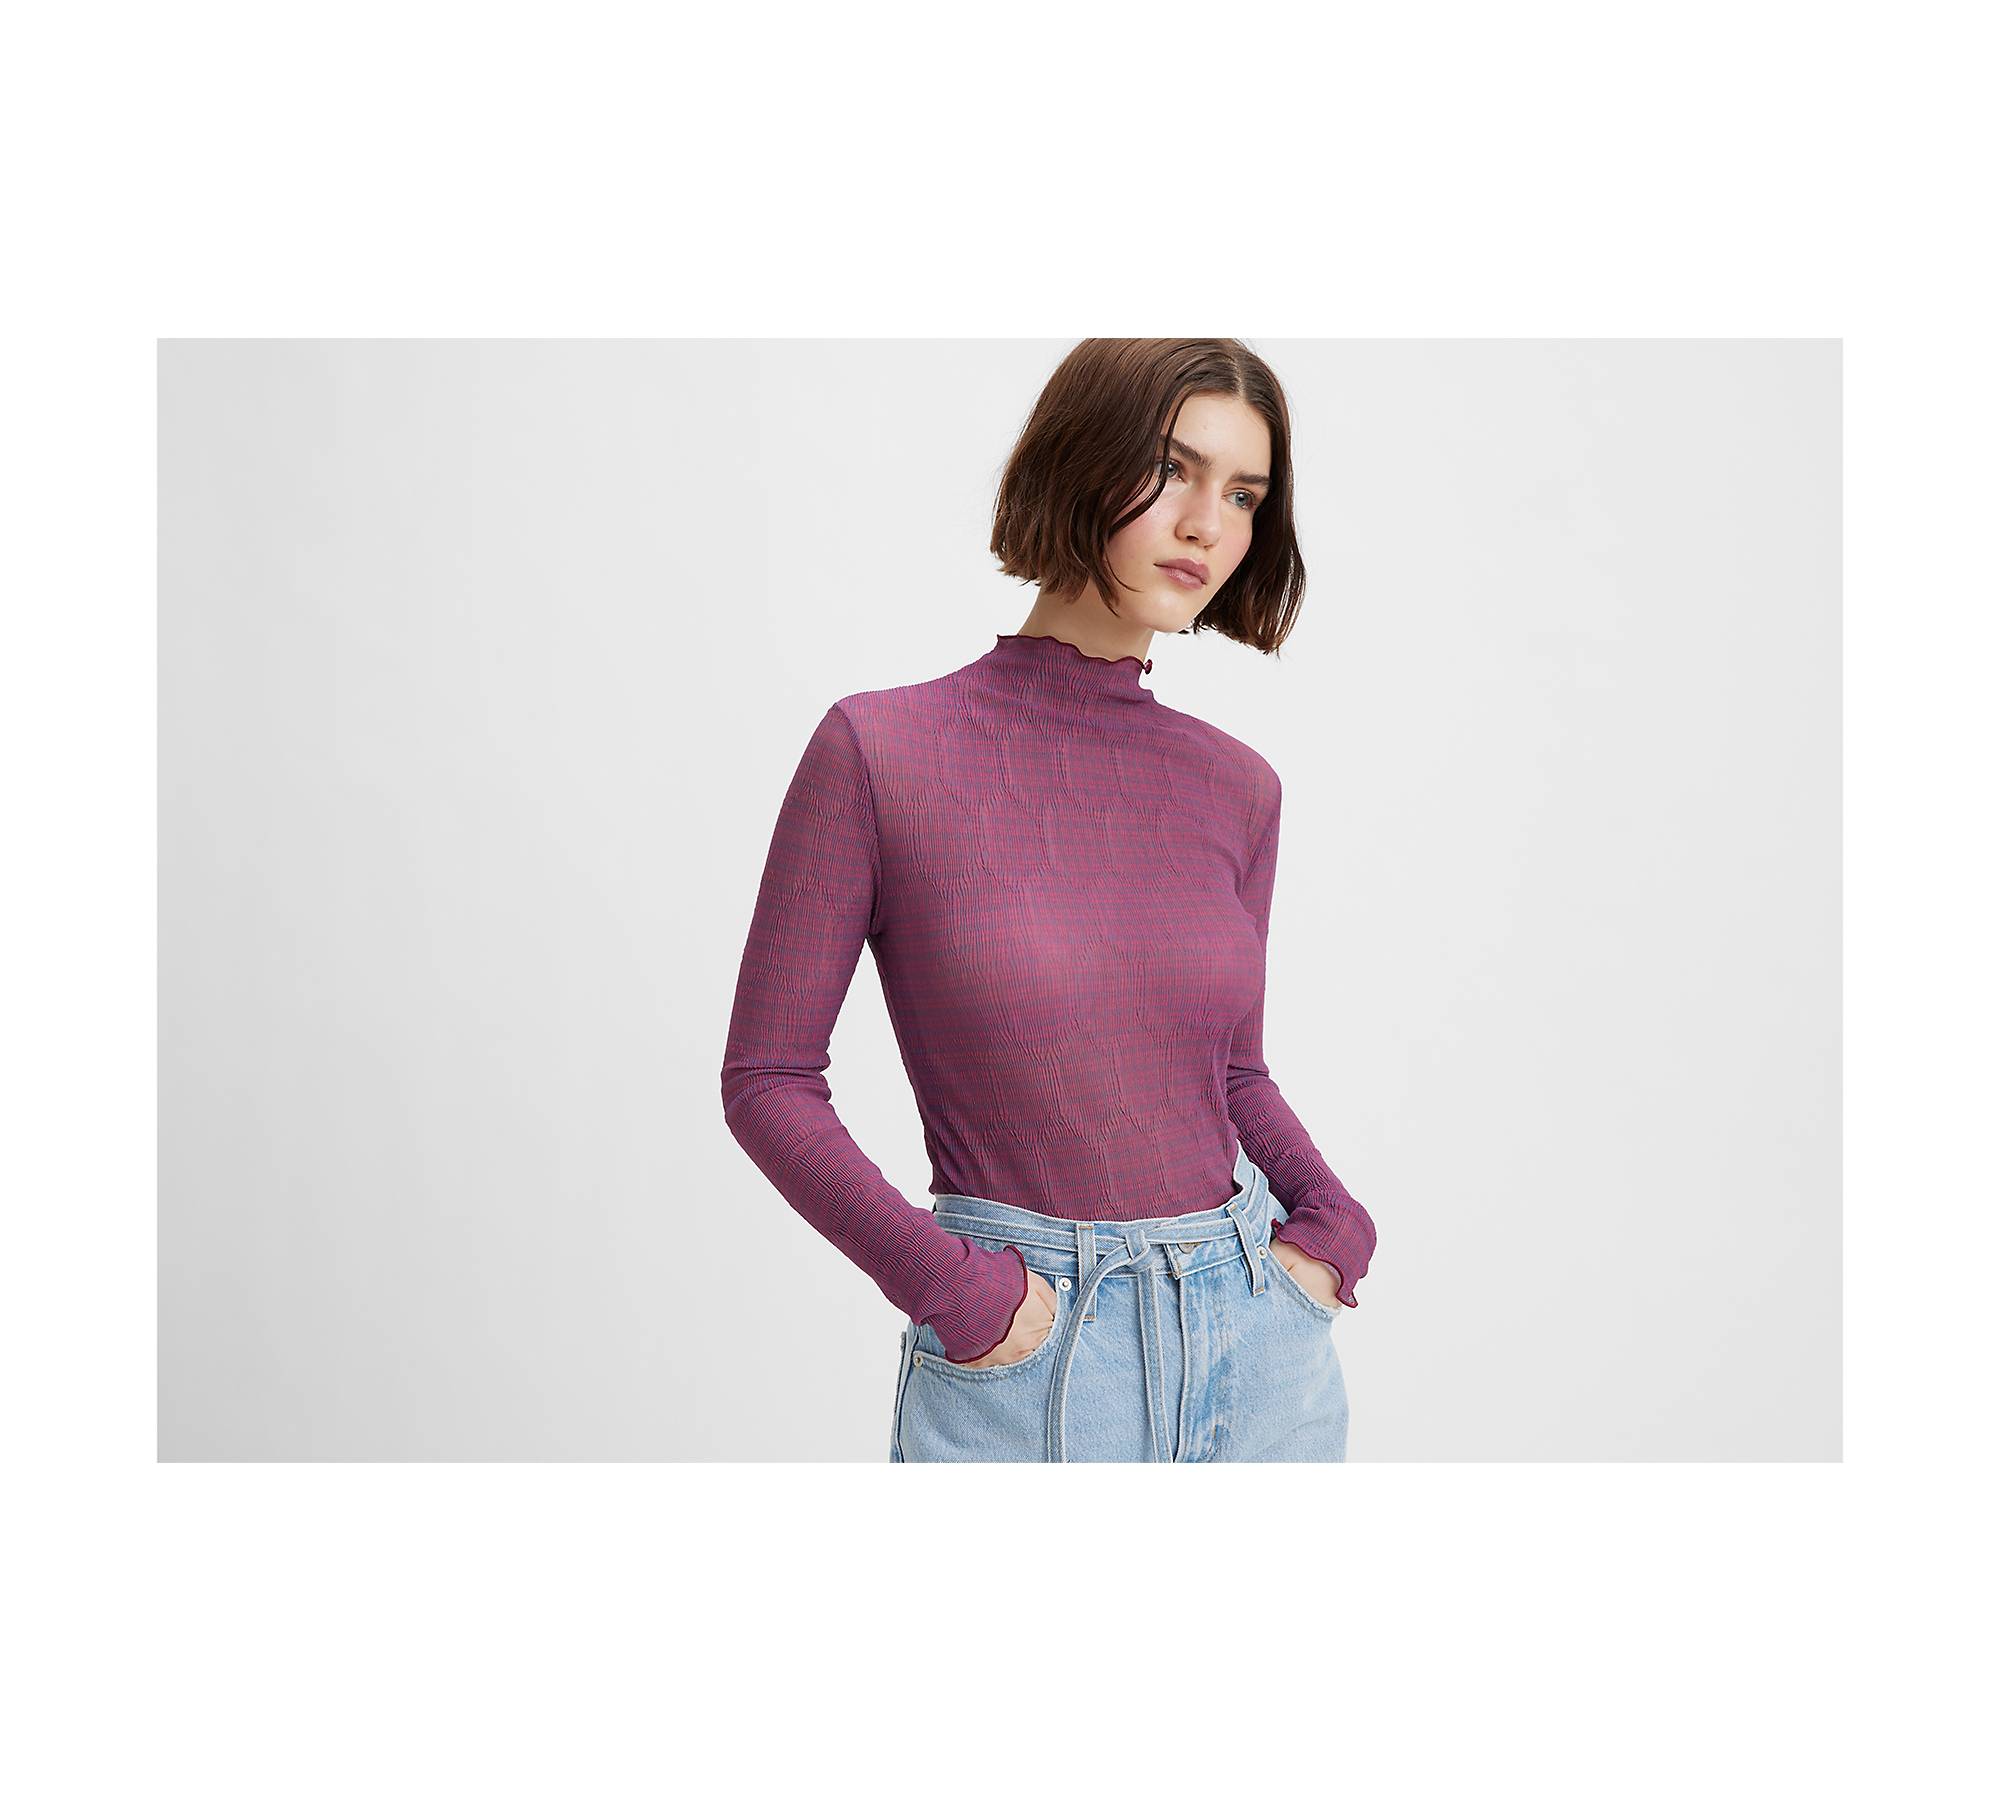 The Long sleeve sheer top trend you need now - Jadore-Fashion